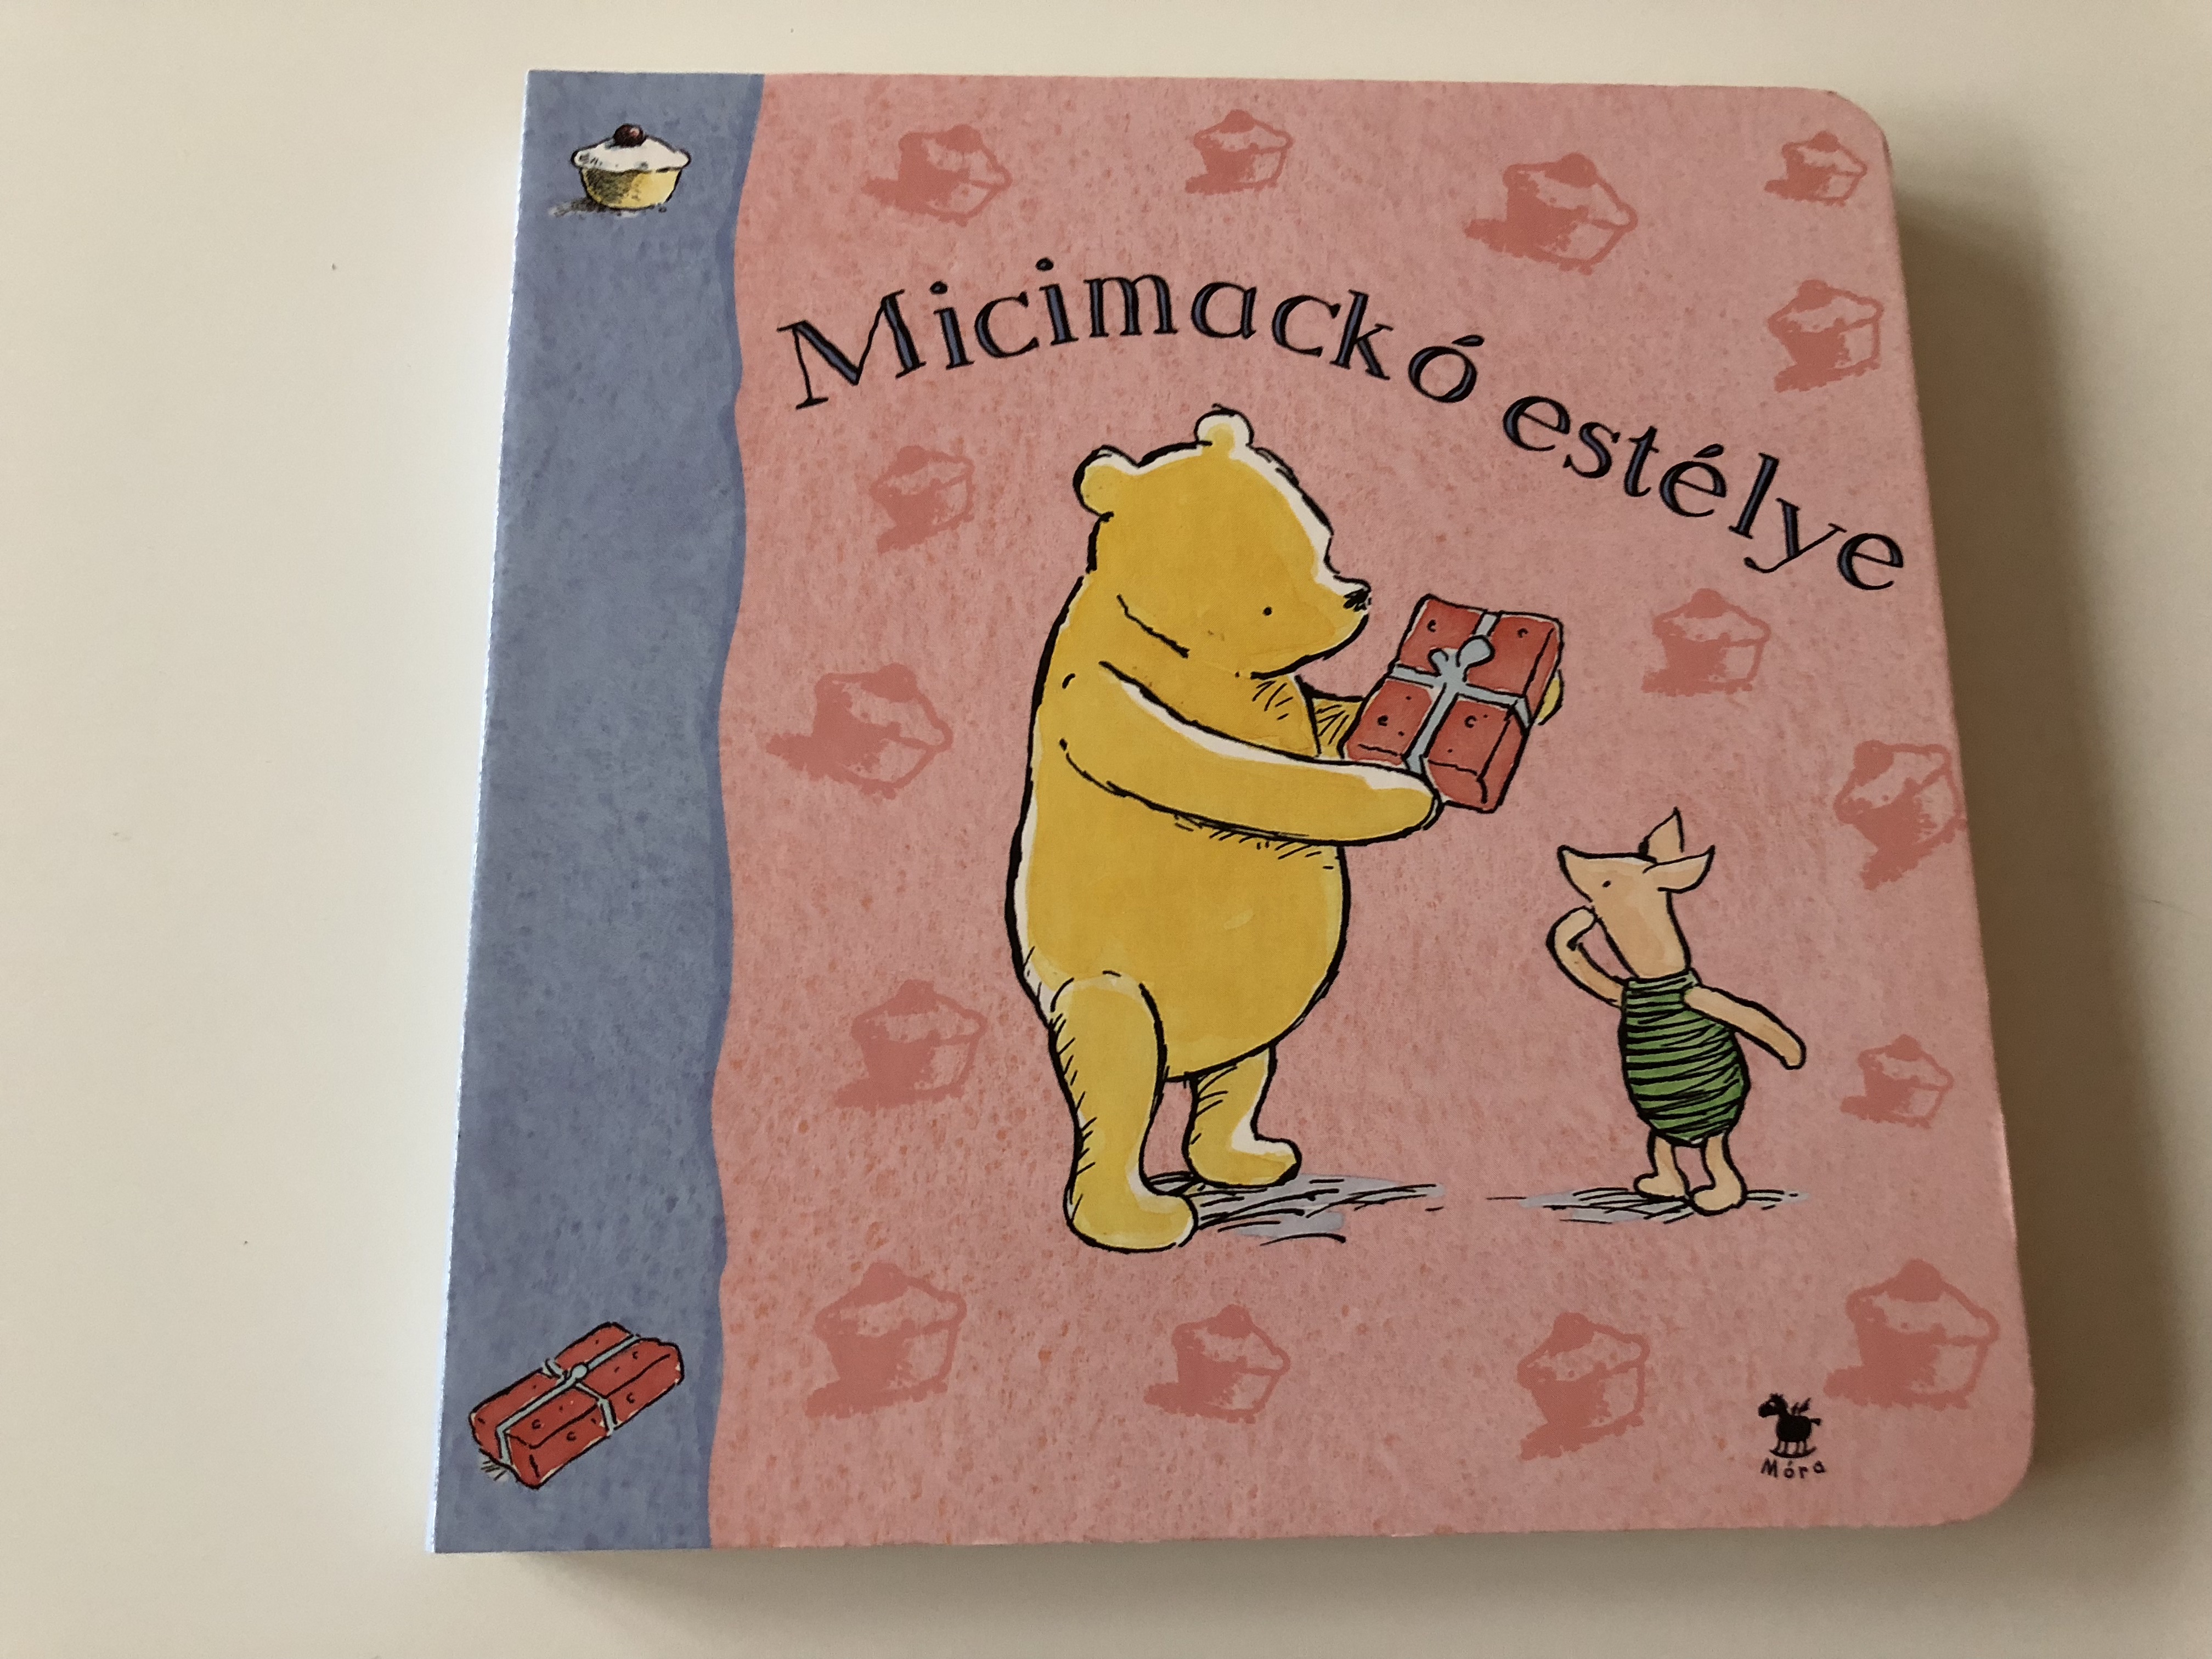 Micimackó estélye / Színes Lapozó / Hungarian Edition Colorful Boardbook  For Children about Winnie the Pooh / Based on the Winnie the Pooh ' works  by A. A. Milne and E. H. Shepard - bibleinmylanguage